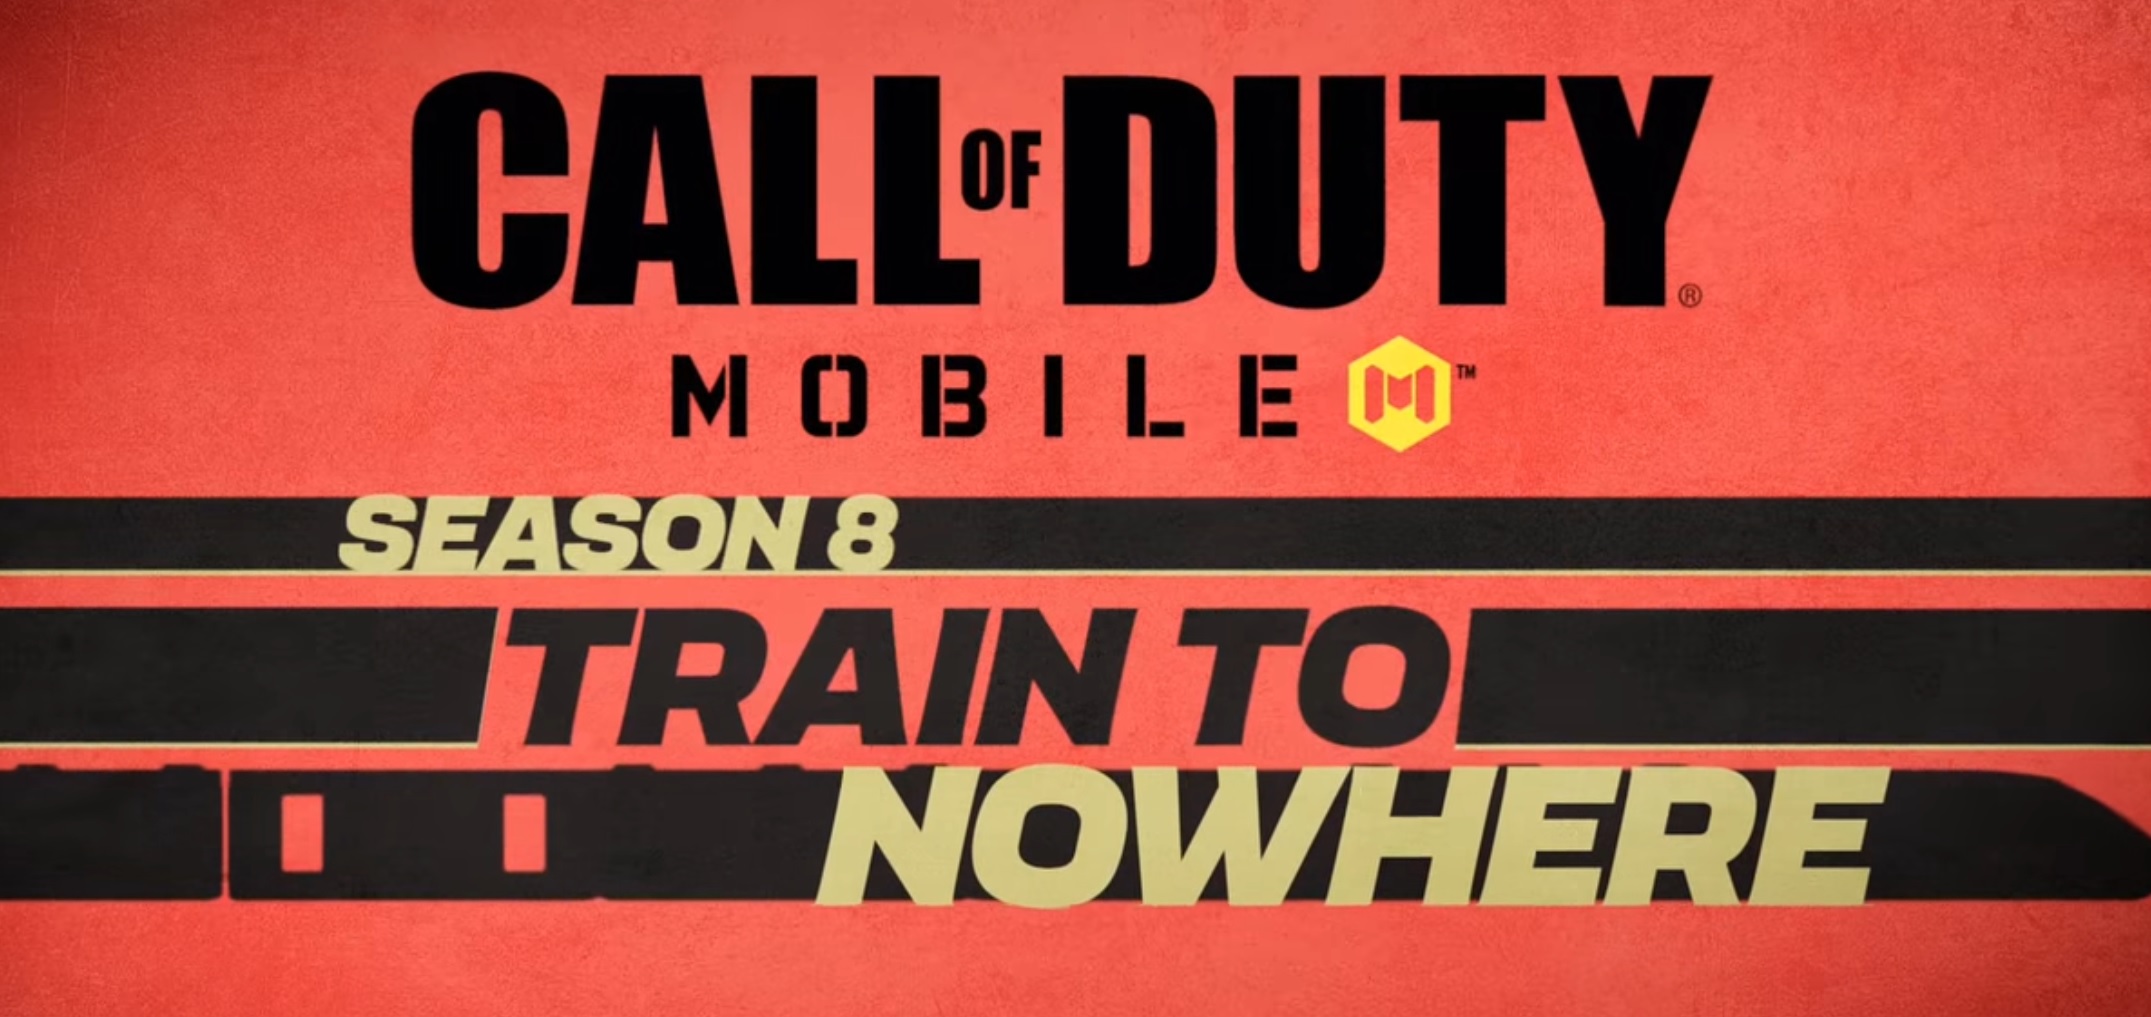 Arriva Call of Duty: Mobile Stagione 8 - Train to Nowhere